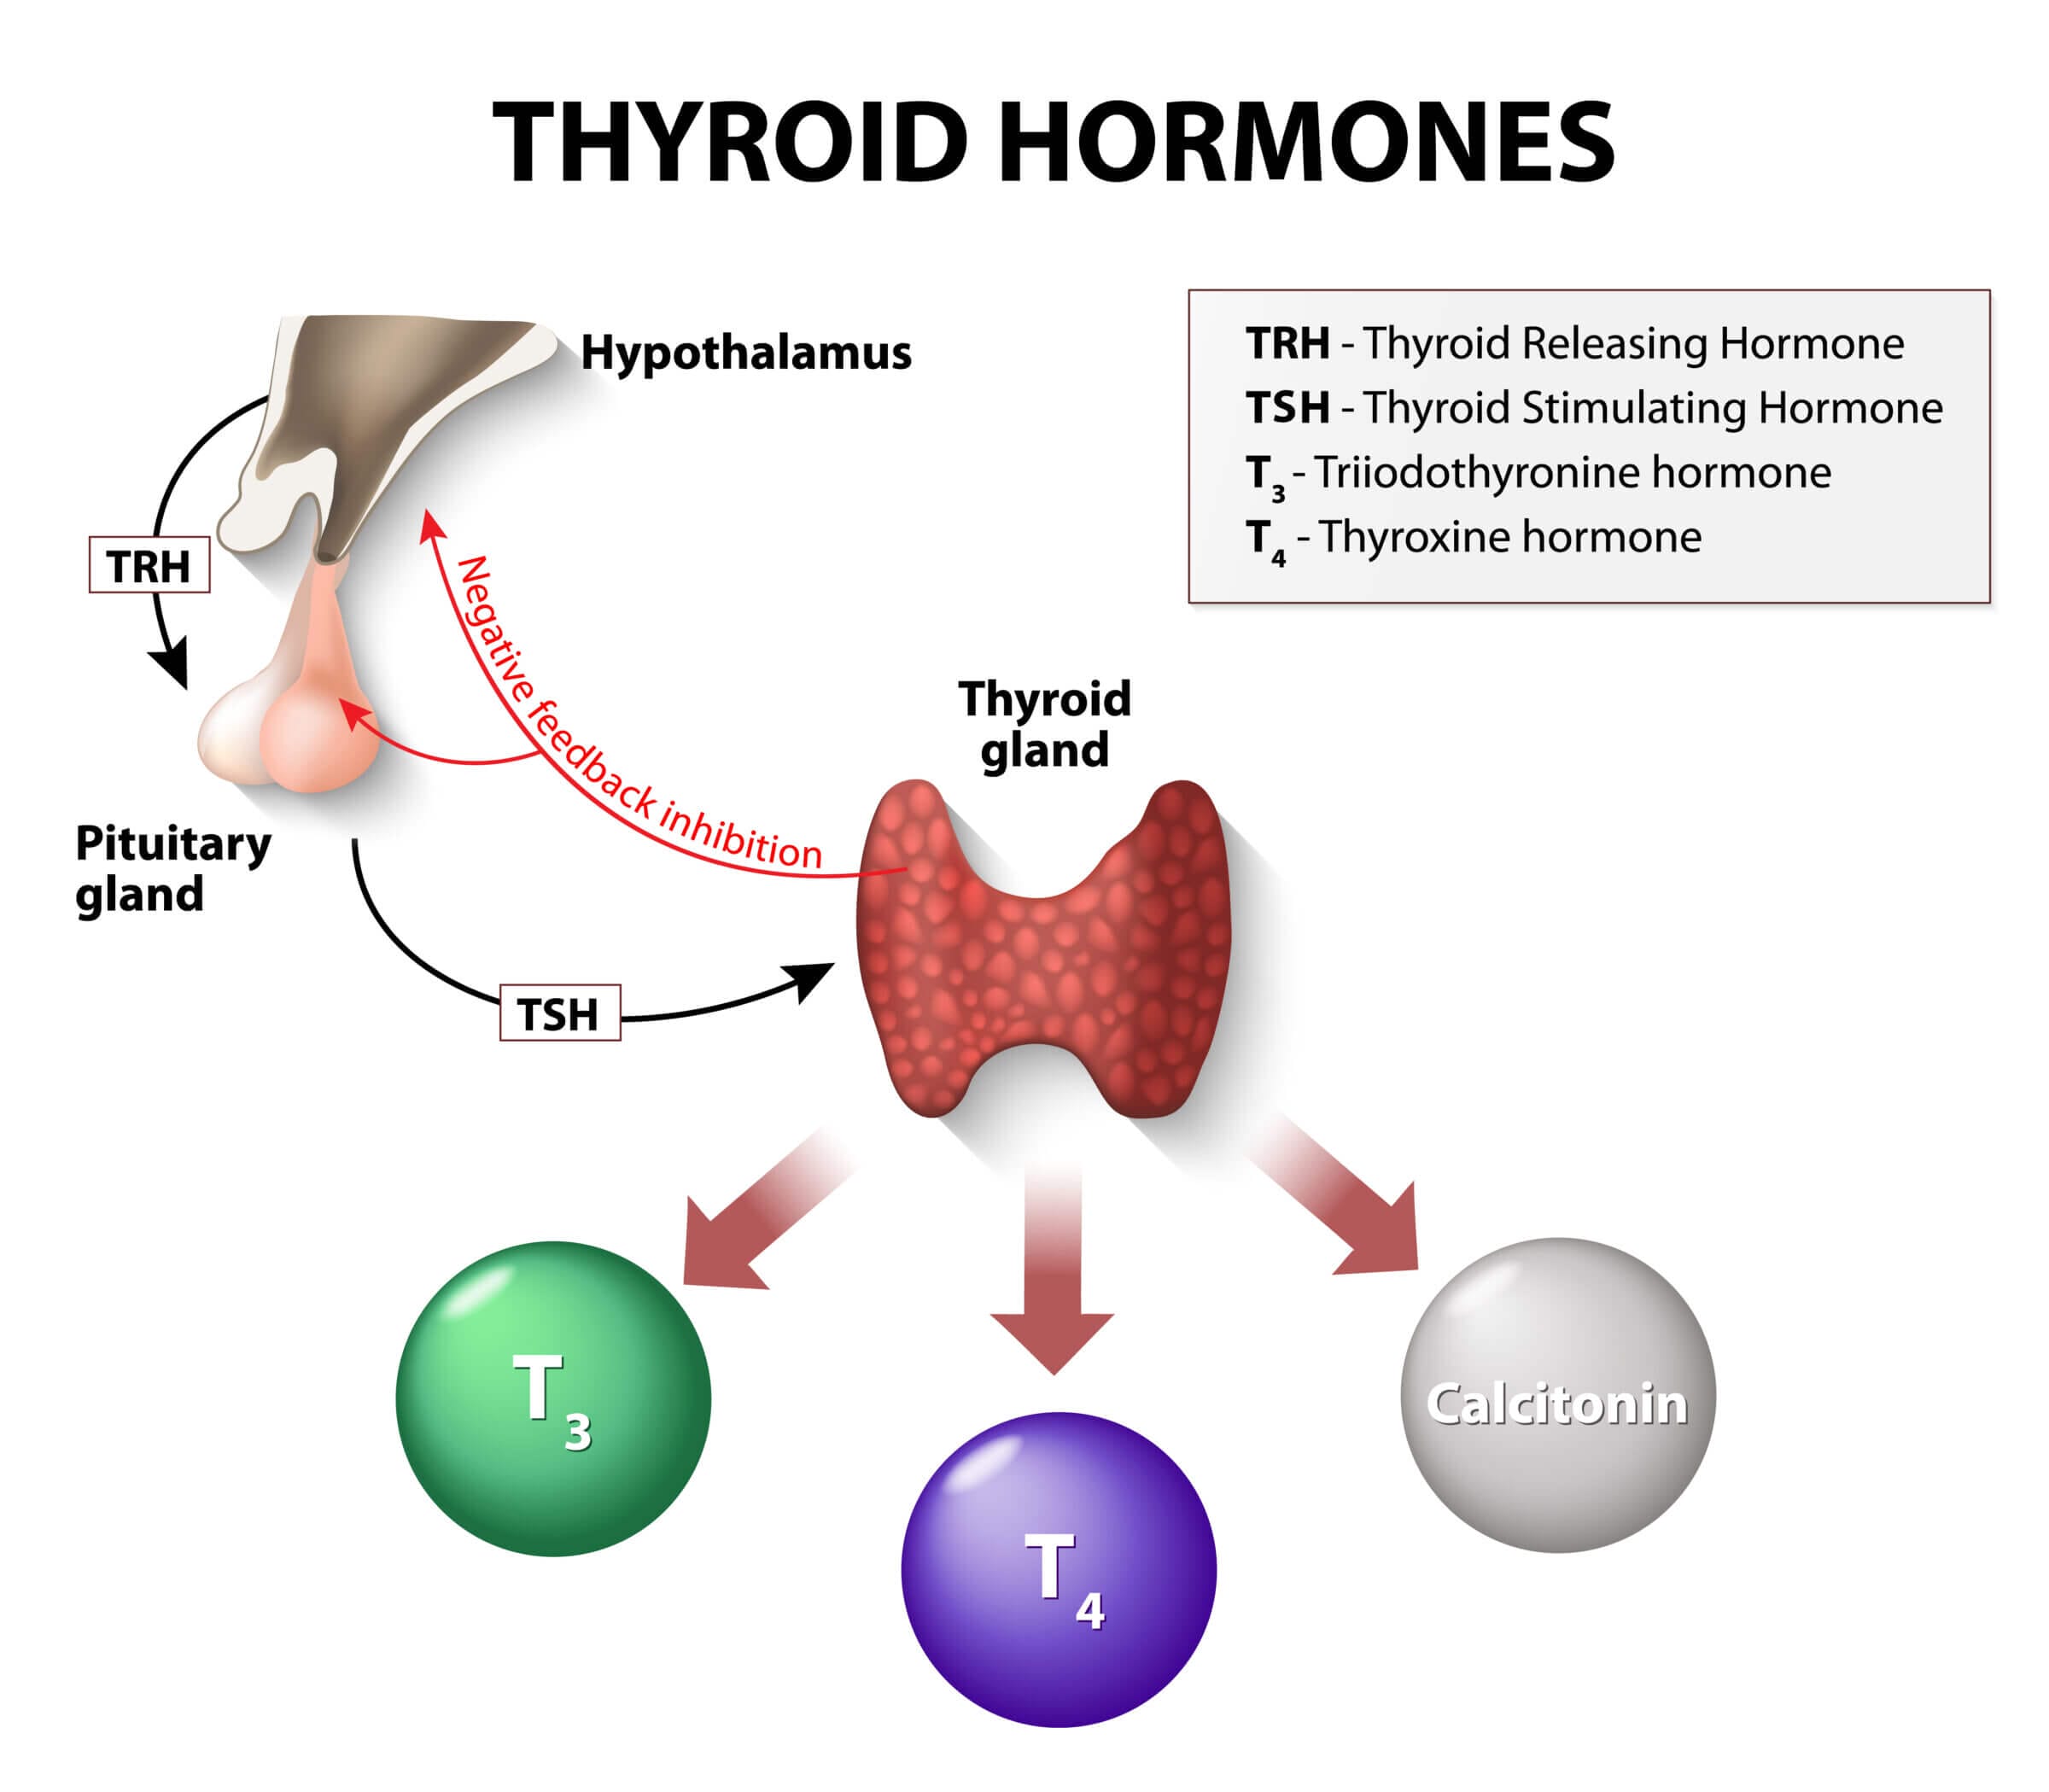 Low thyroid hormones can be caused by issues with your hypothalamus, pituitary gland or thyroid gland.